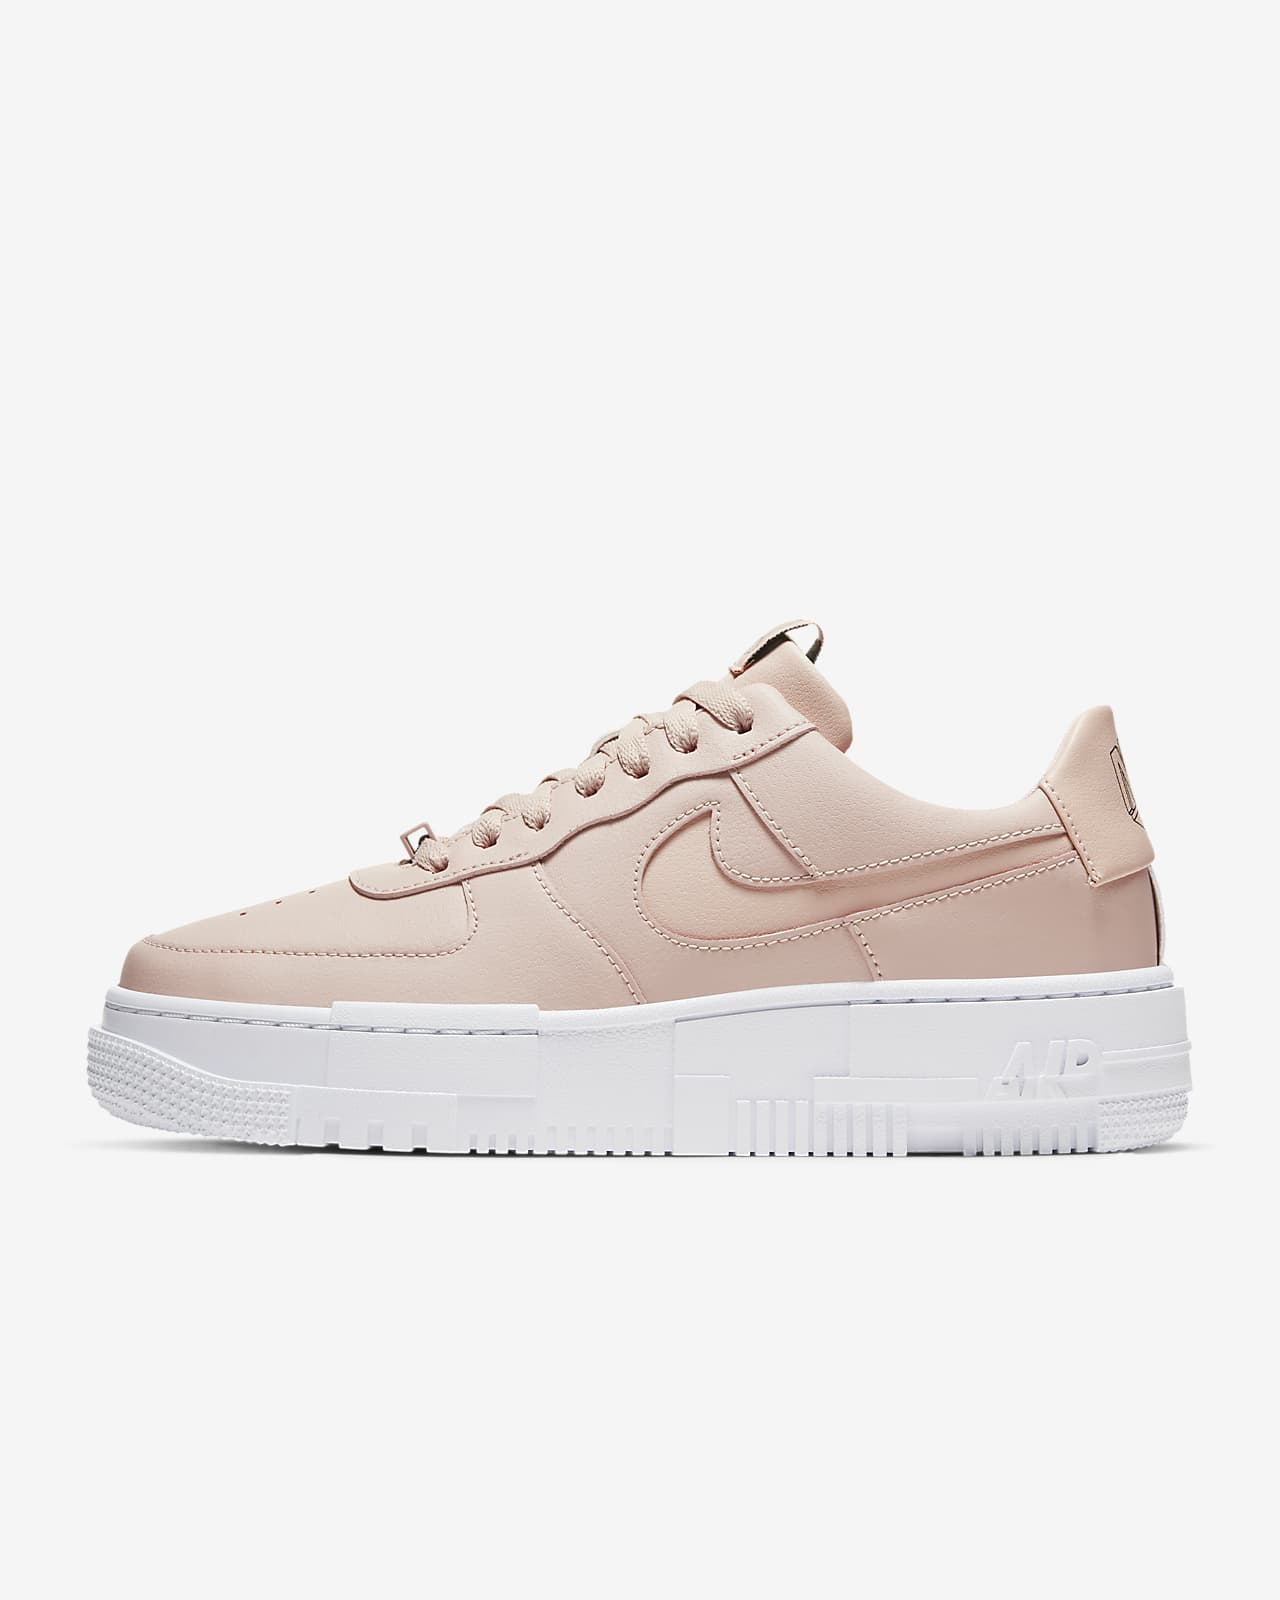 Chaussure Nike Air Force 1 Pixel pour Femme